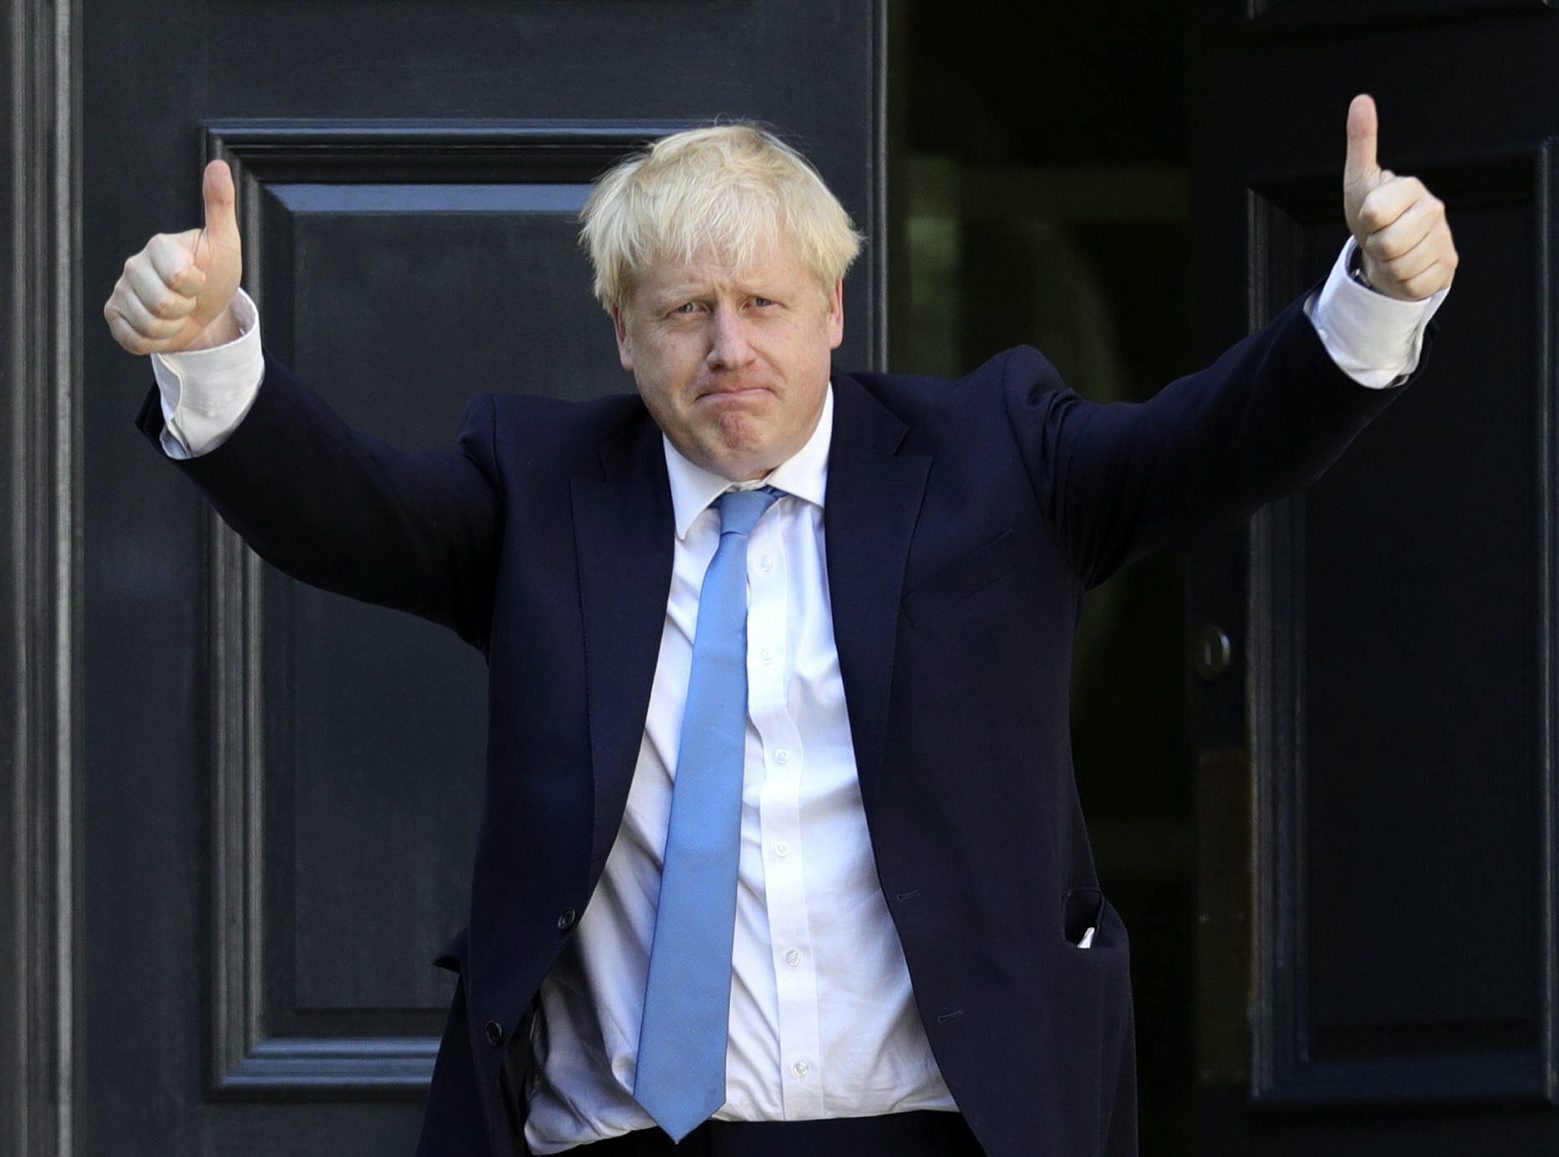 Newly elected leader of the Conservative party Boris Johnson arrives at Conservative party HQ in London, Tuesday, July 23, 2019. Brexit-hard-liner Boris Johnson, one of BritainÄôs most famous and divisive politicians, won the race to lead the governing Conservative Party on Tuesday, and will become the countryÄôs next prime minister in a little over 24 hours. (Aaron Chown/PA via AP) Britain Conservatives